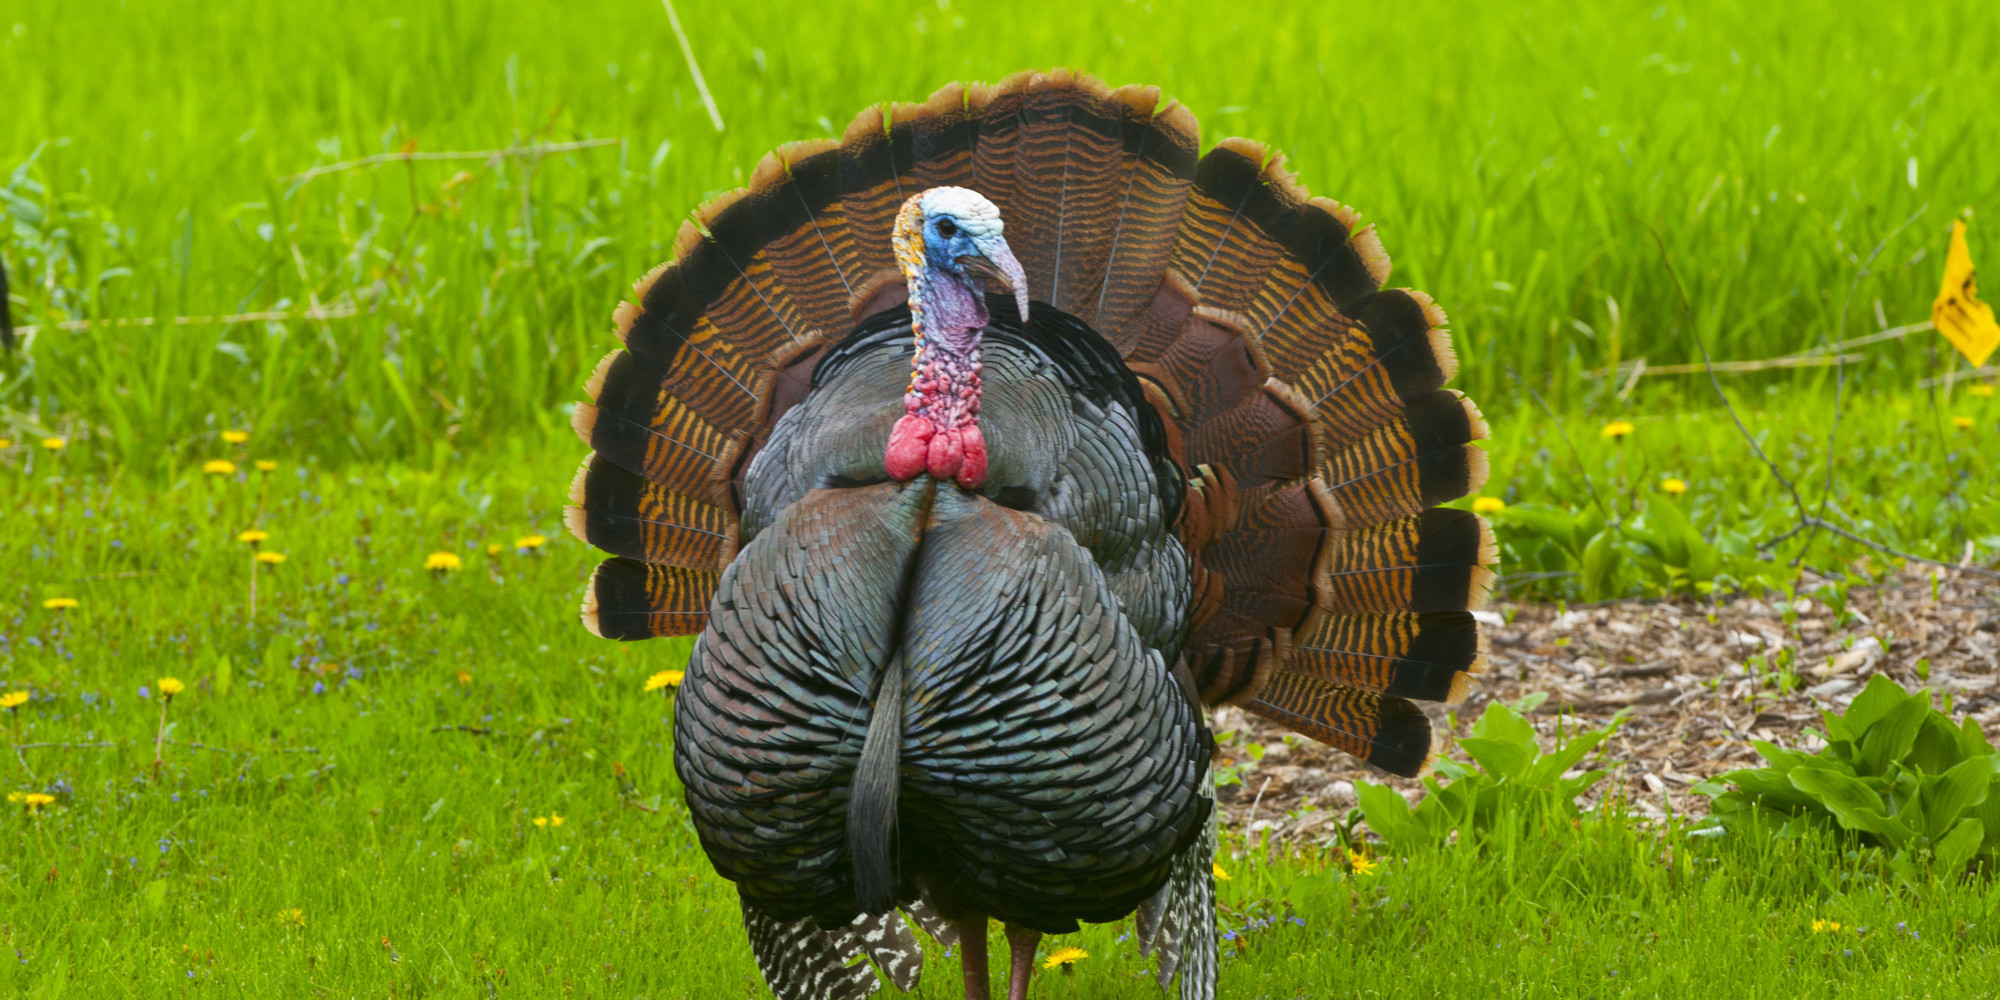 Turkey Thanksgiving Picture
 A Feast Ways To Support Humane Treatment Turkeys